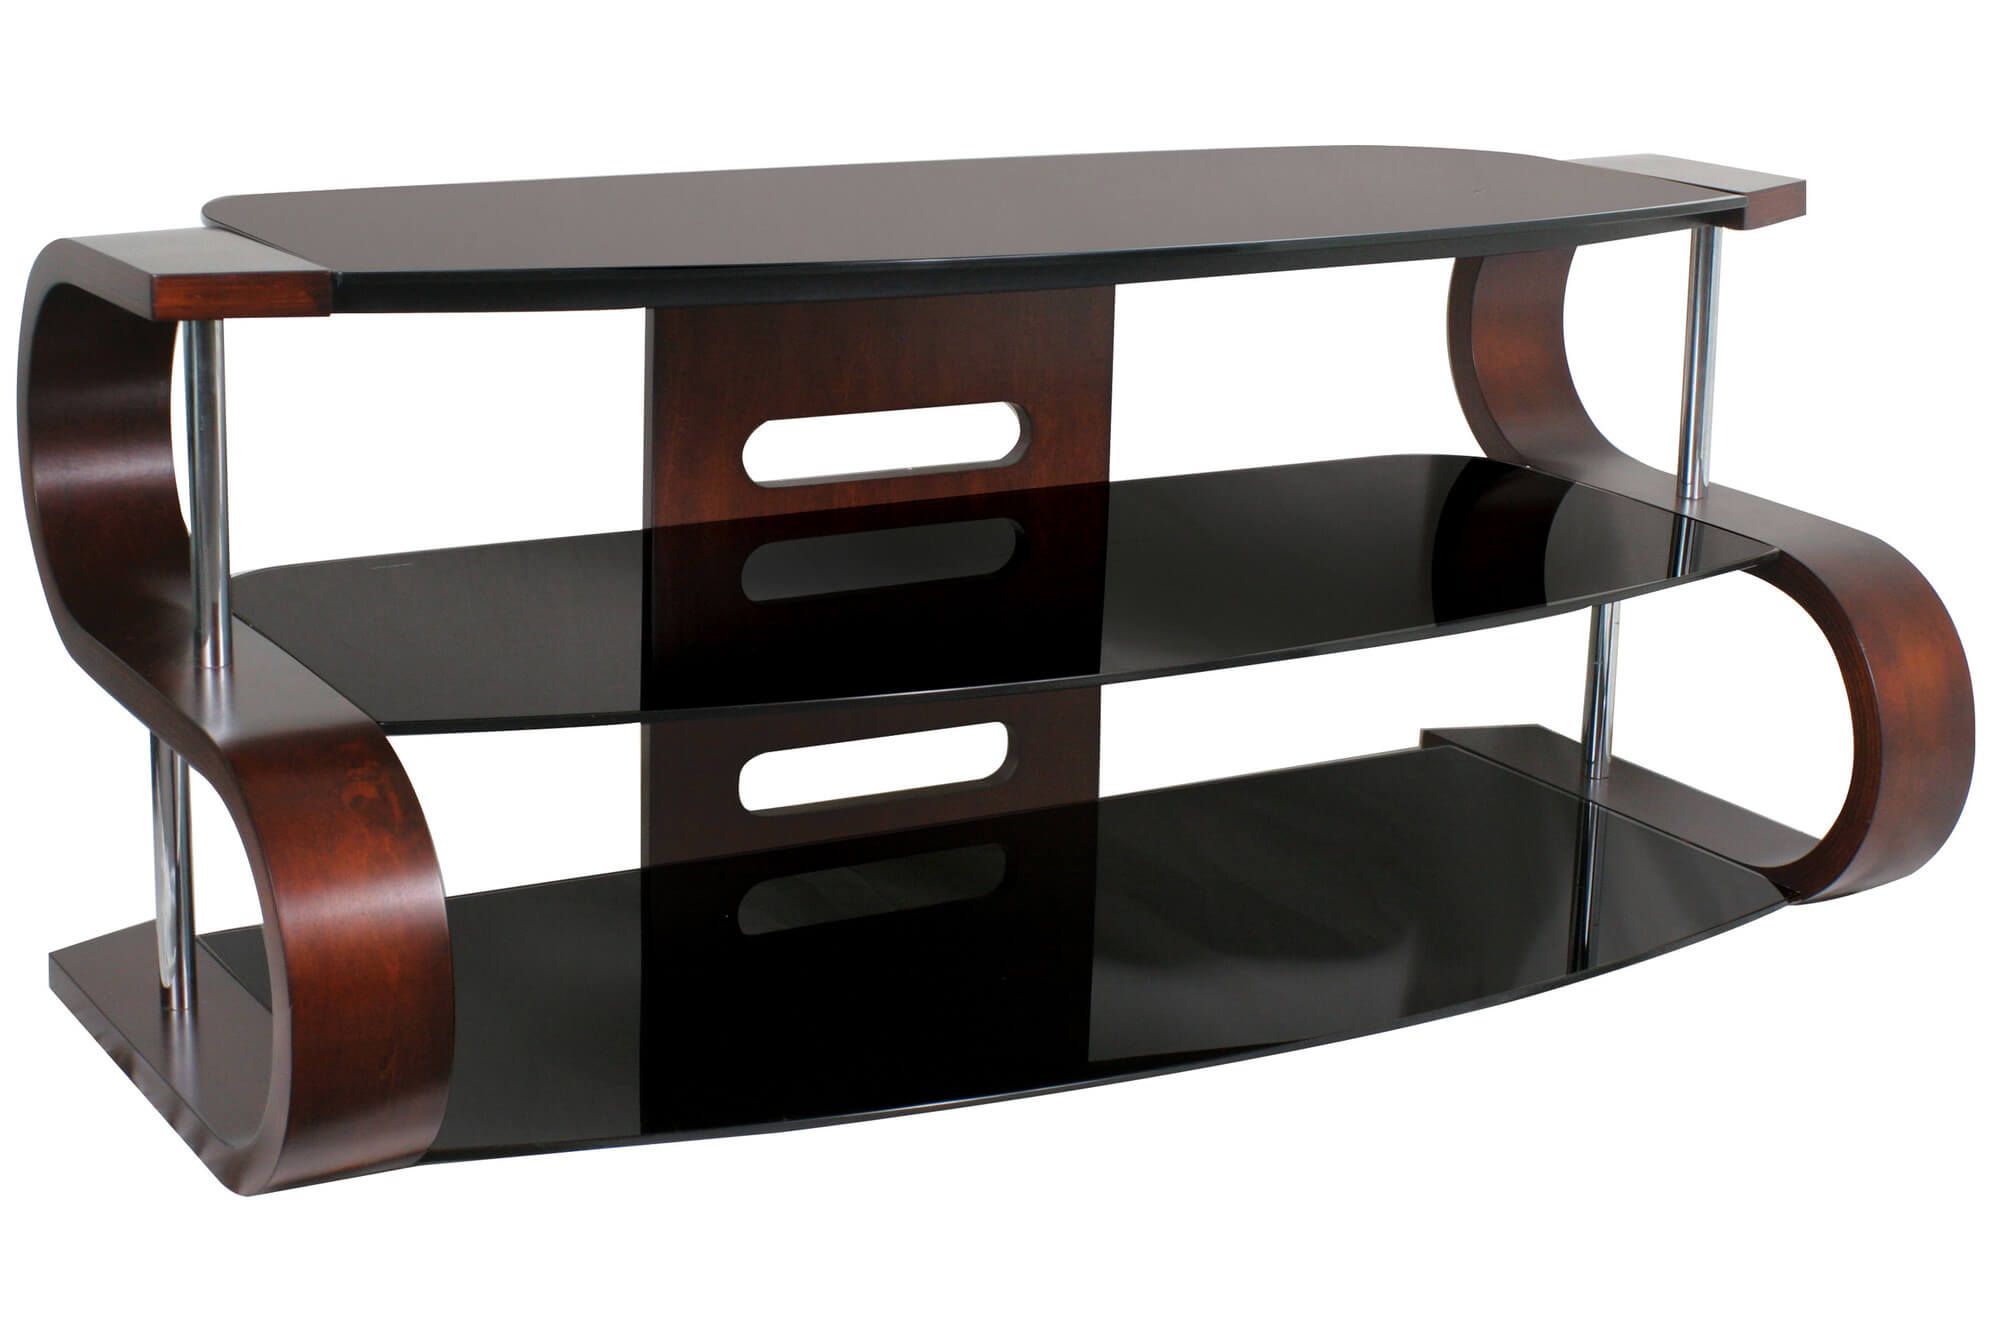 16 Types Of Tv Stands (comprehensive Buying Guide) With Glass Shelves Tv Stands (View 14 of 15)